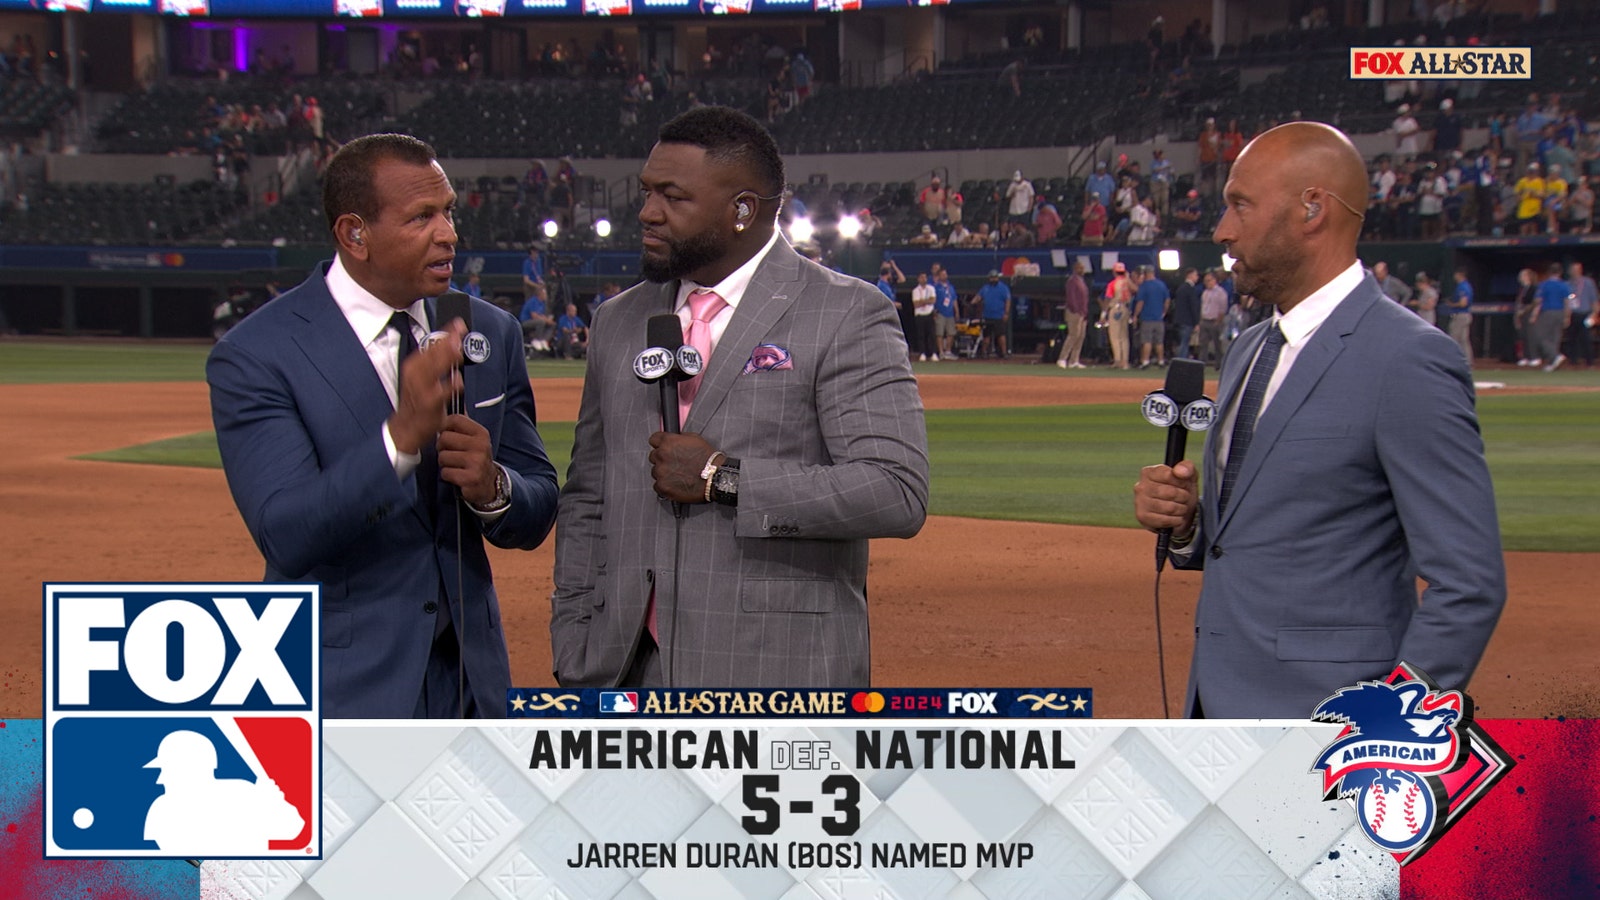 MLB All-Star Game instant analysis and World Series predictions with the 'MLB on FOX' crew